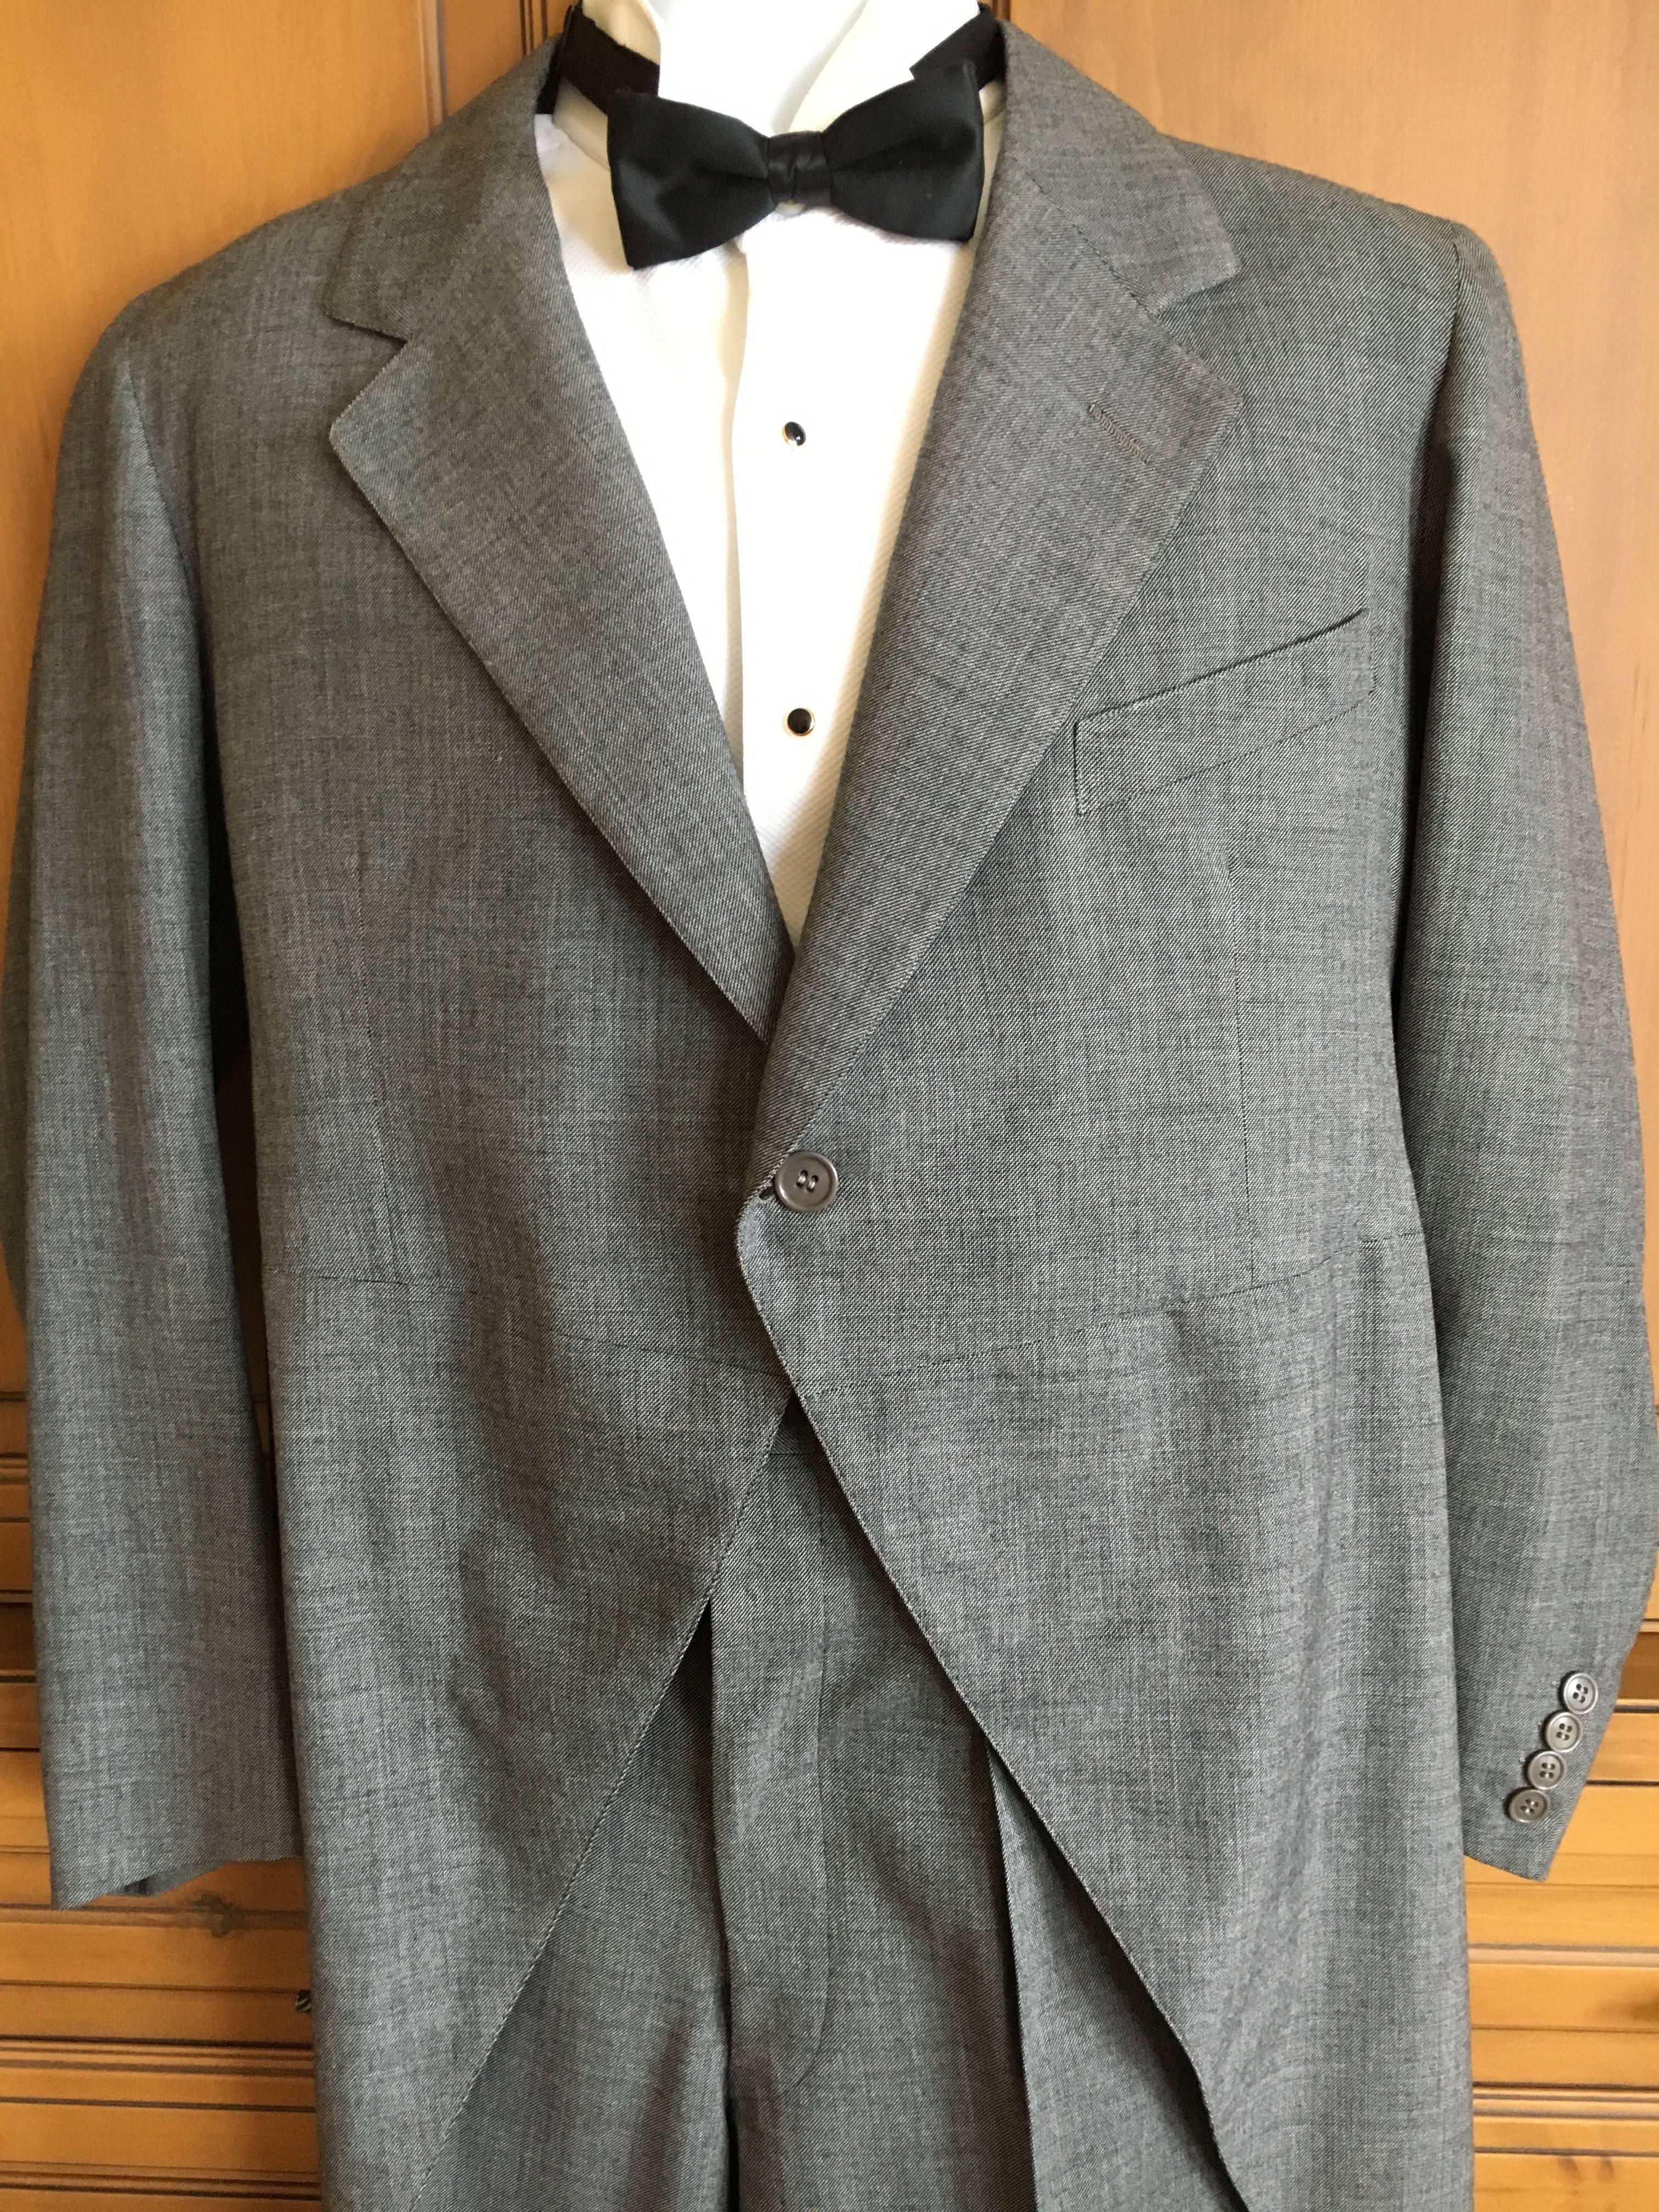 1941 Men's Gray Formal Cutaway Tailcoat Suit Dunne & Co. For Sale 2